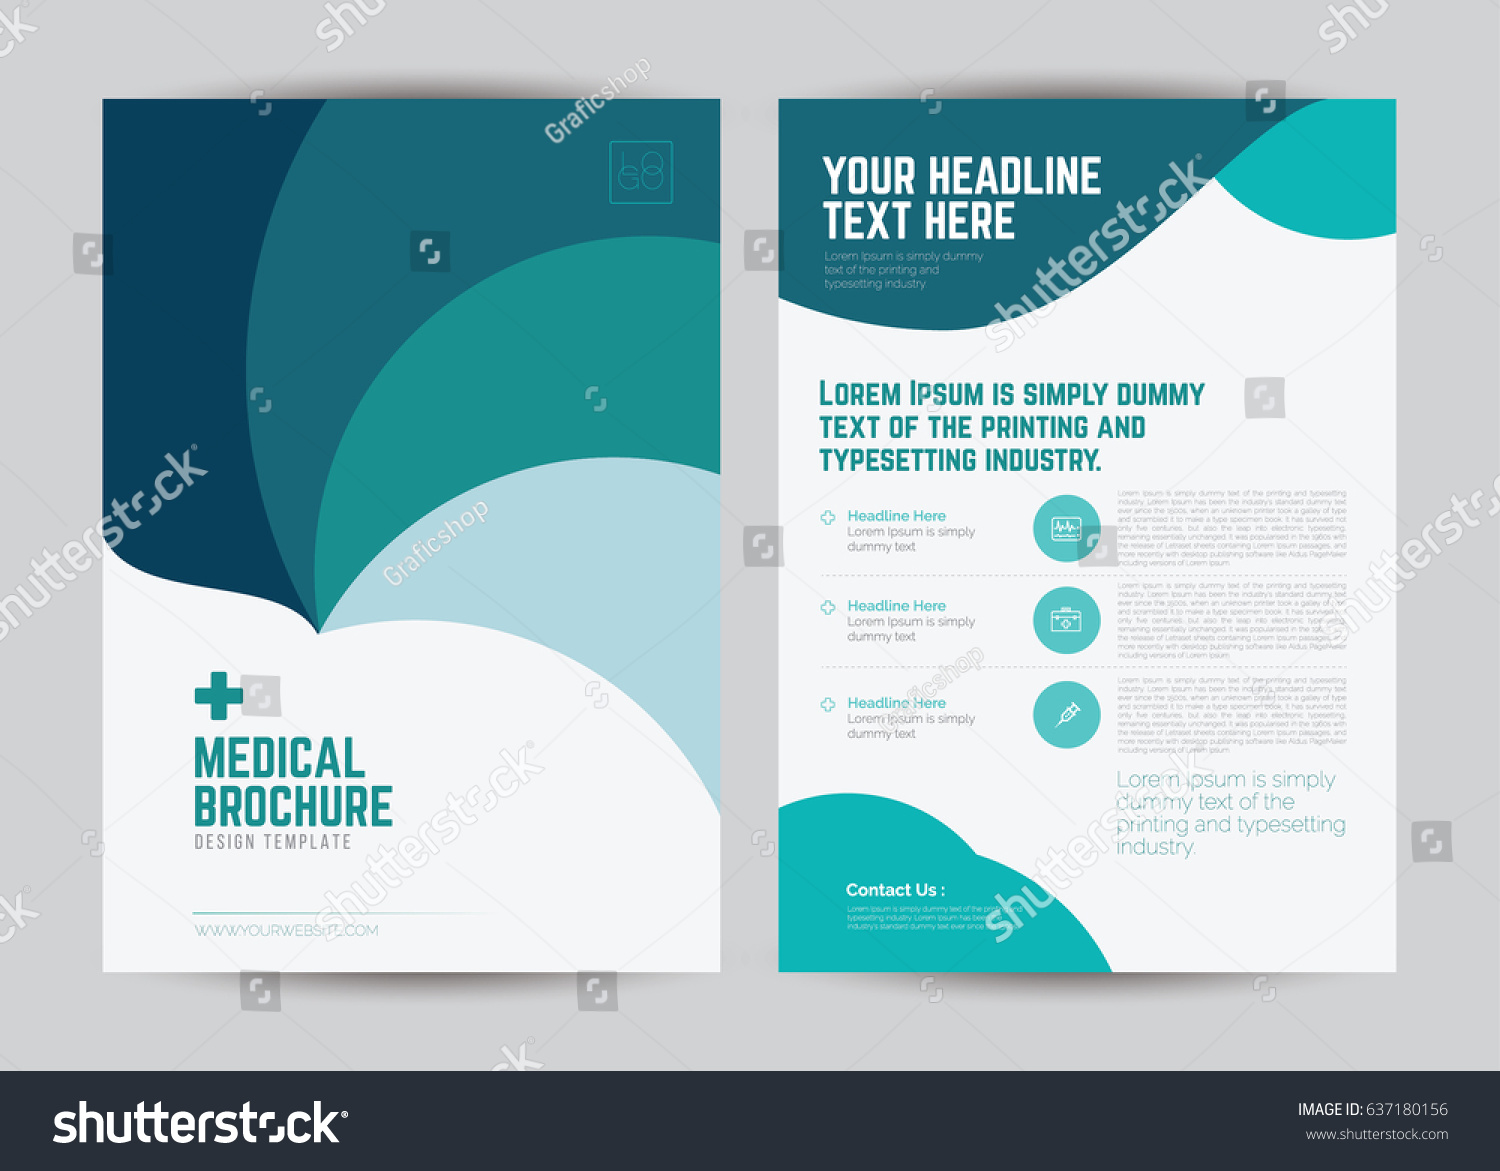 brochure templates healthcare in photoshop free download